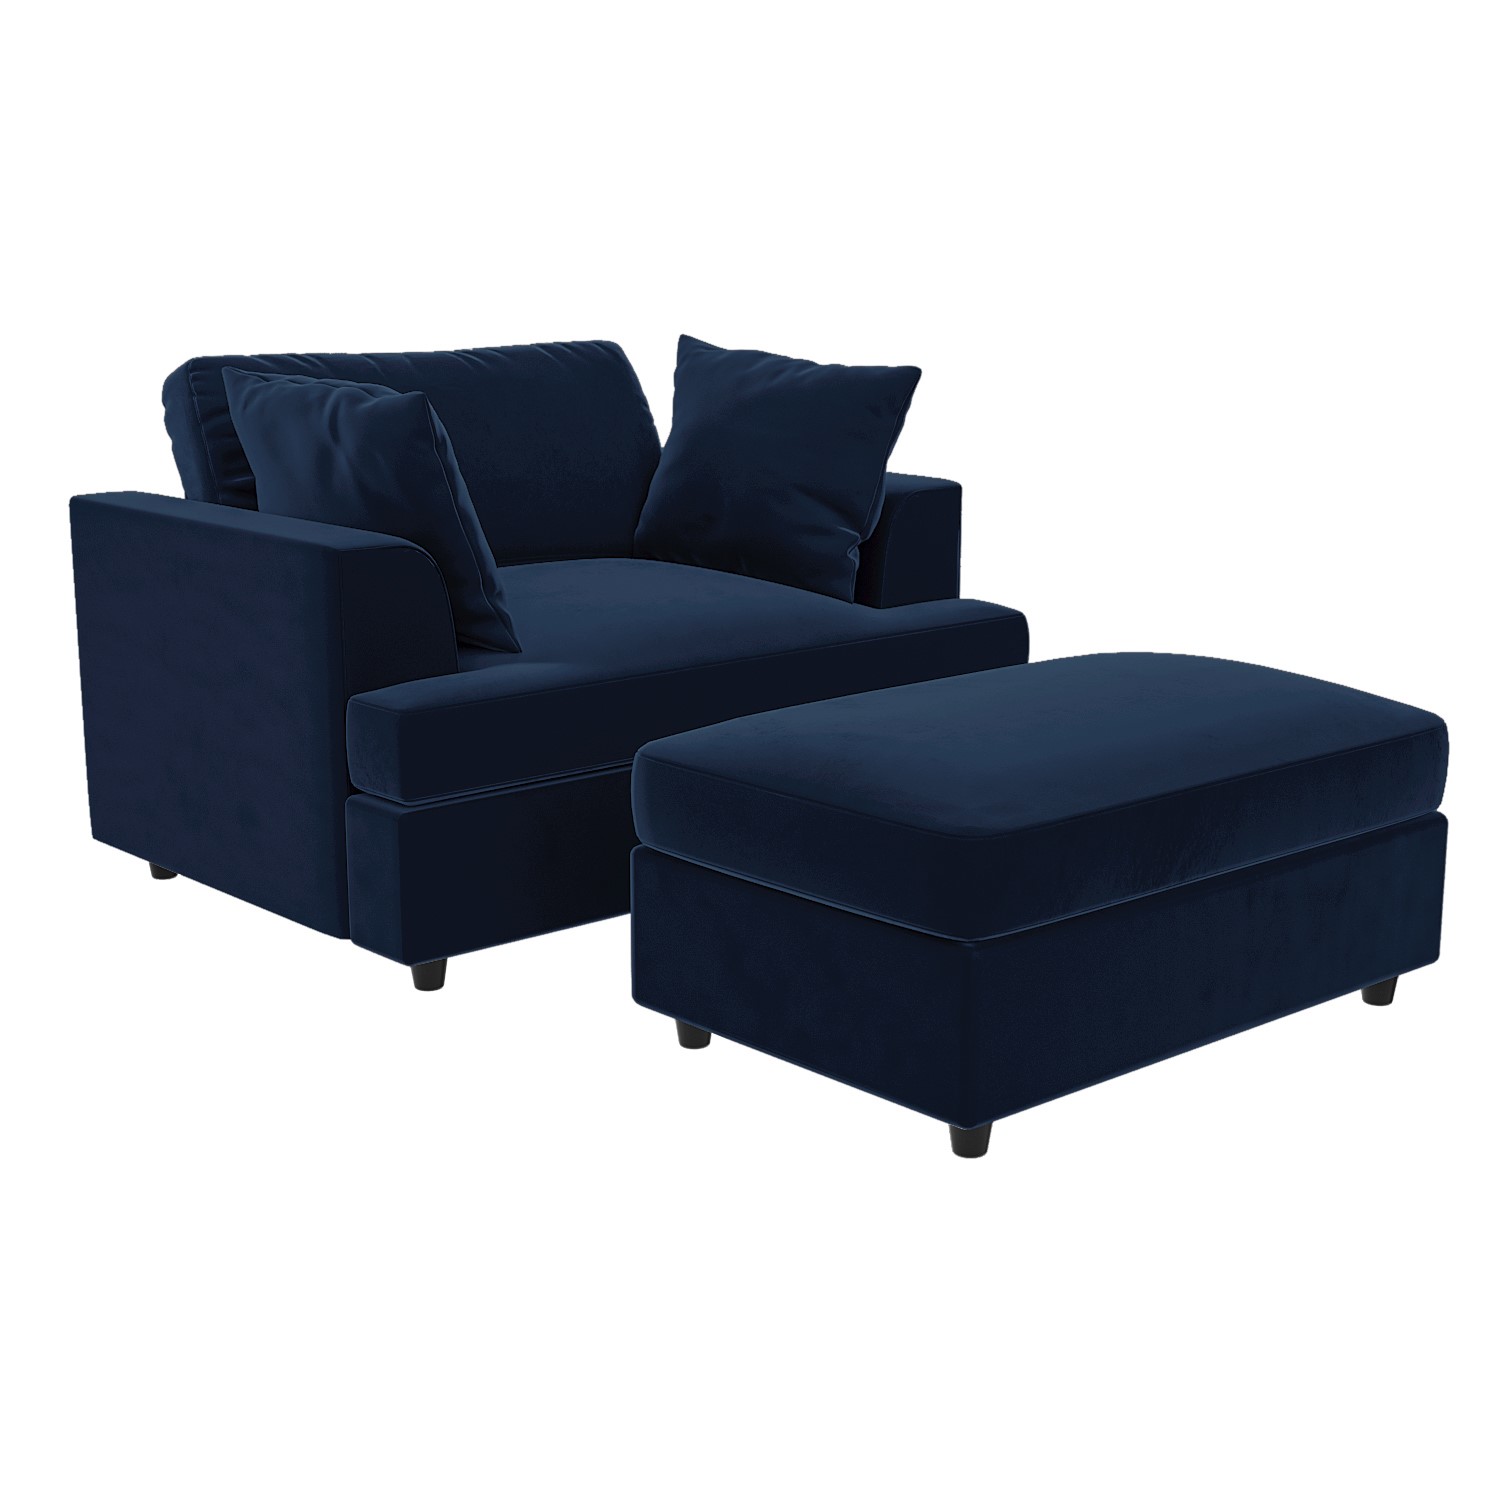 Read more about Navy velvet loveseat and footstool set august